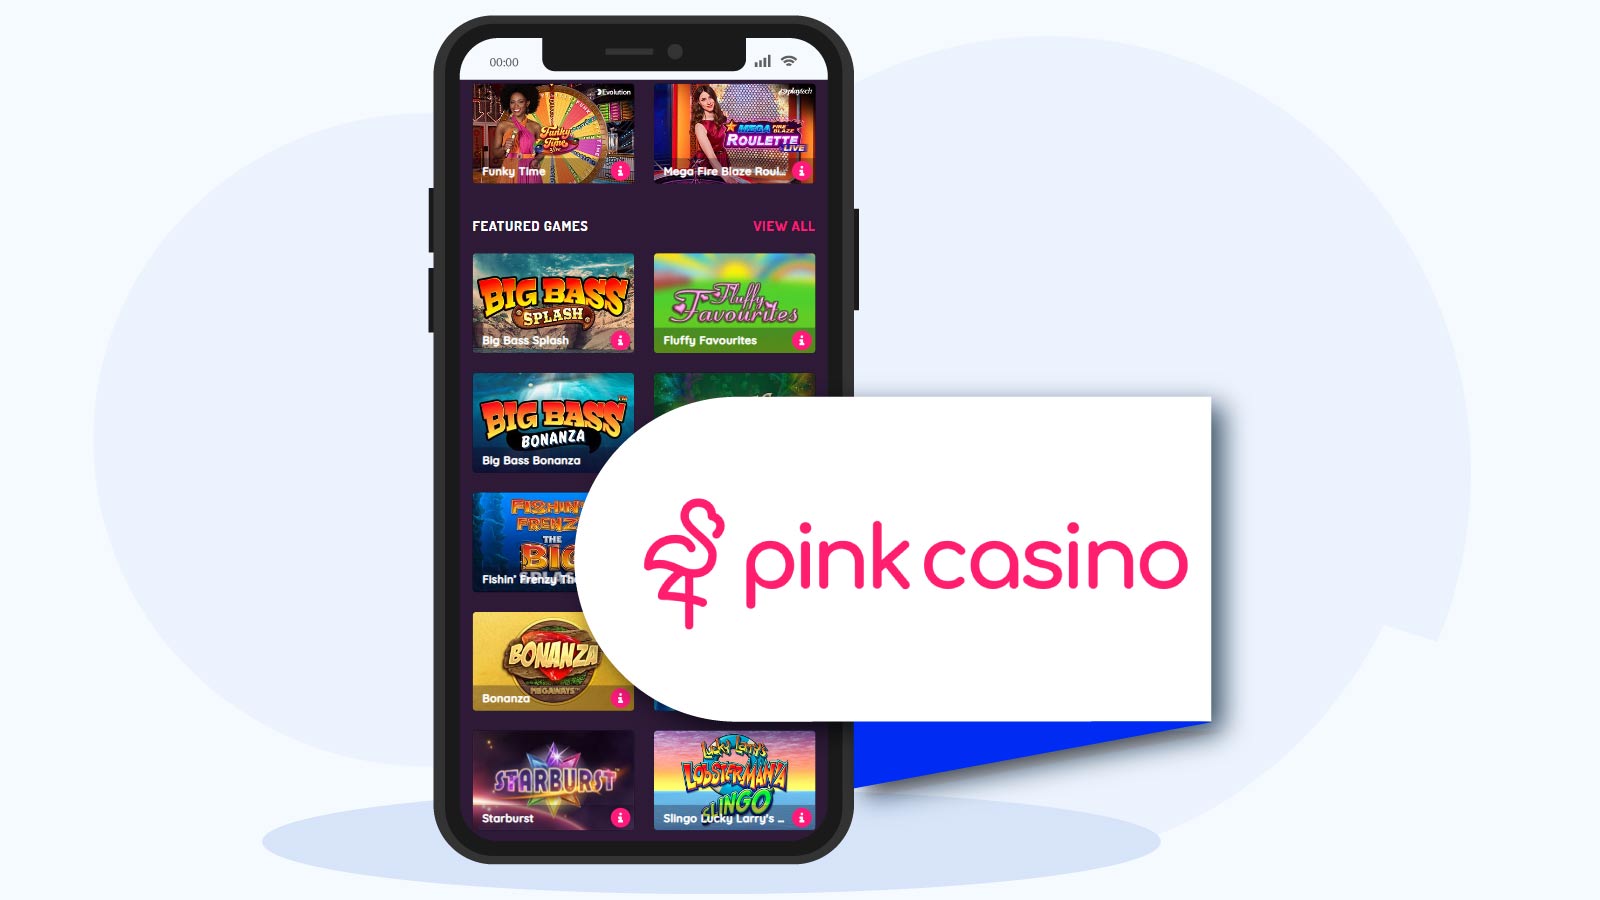 Pink Casino – Most iOS Game Providers